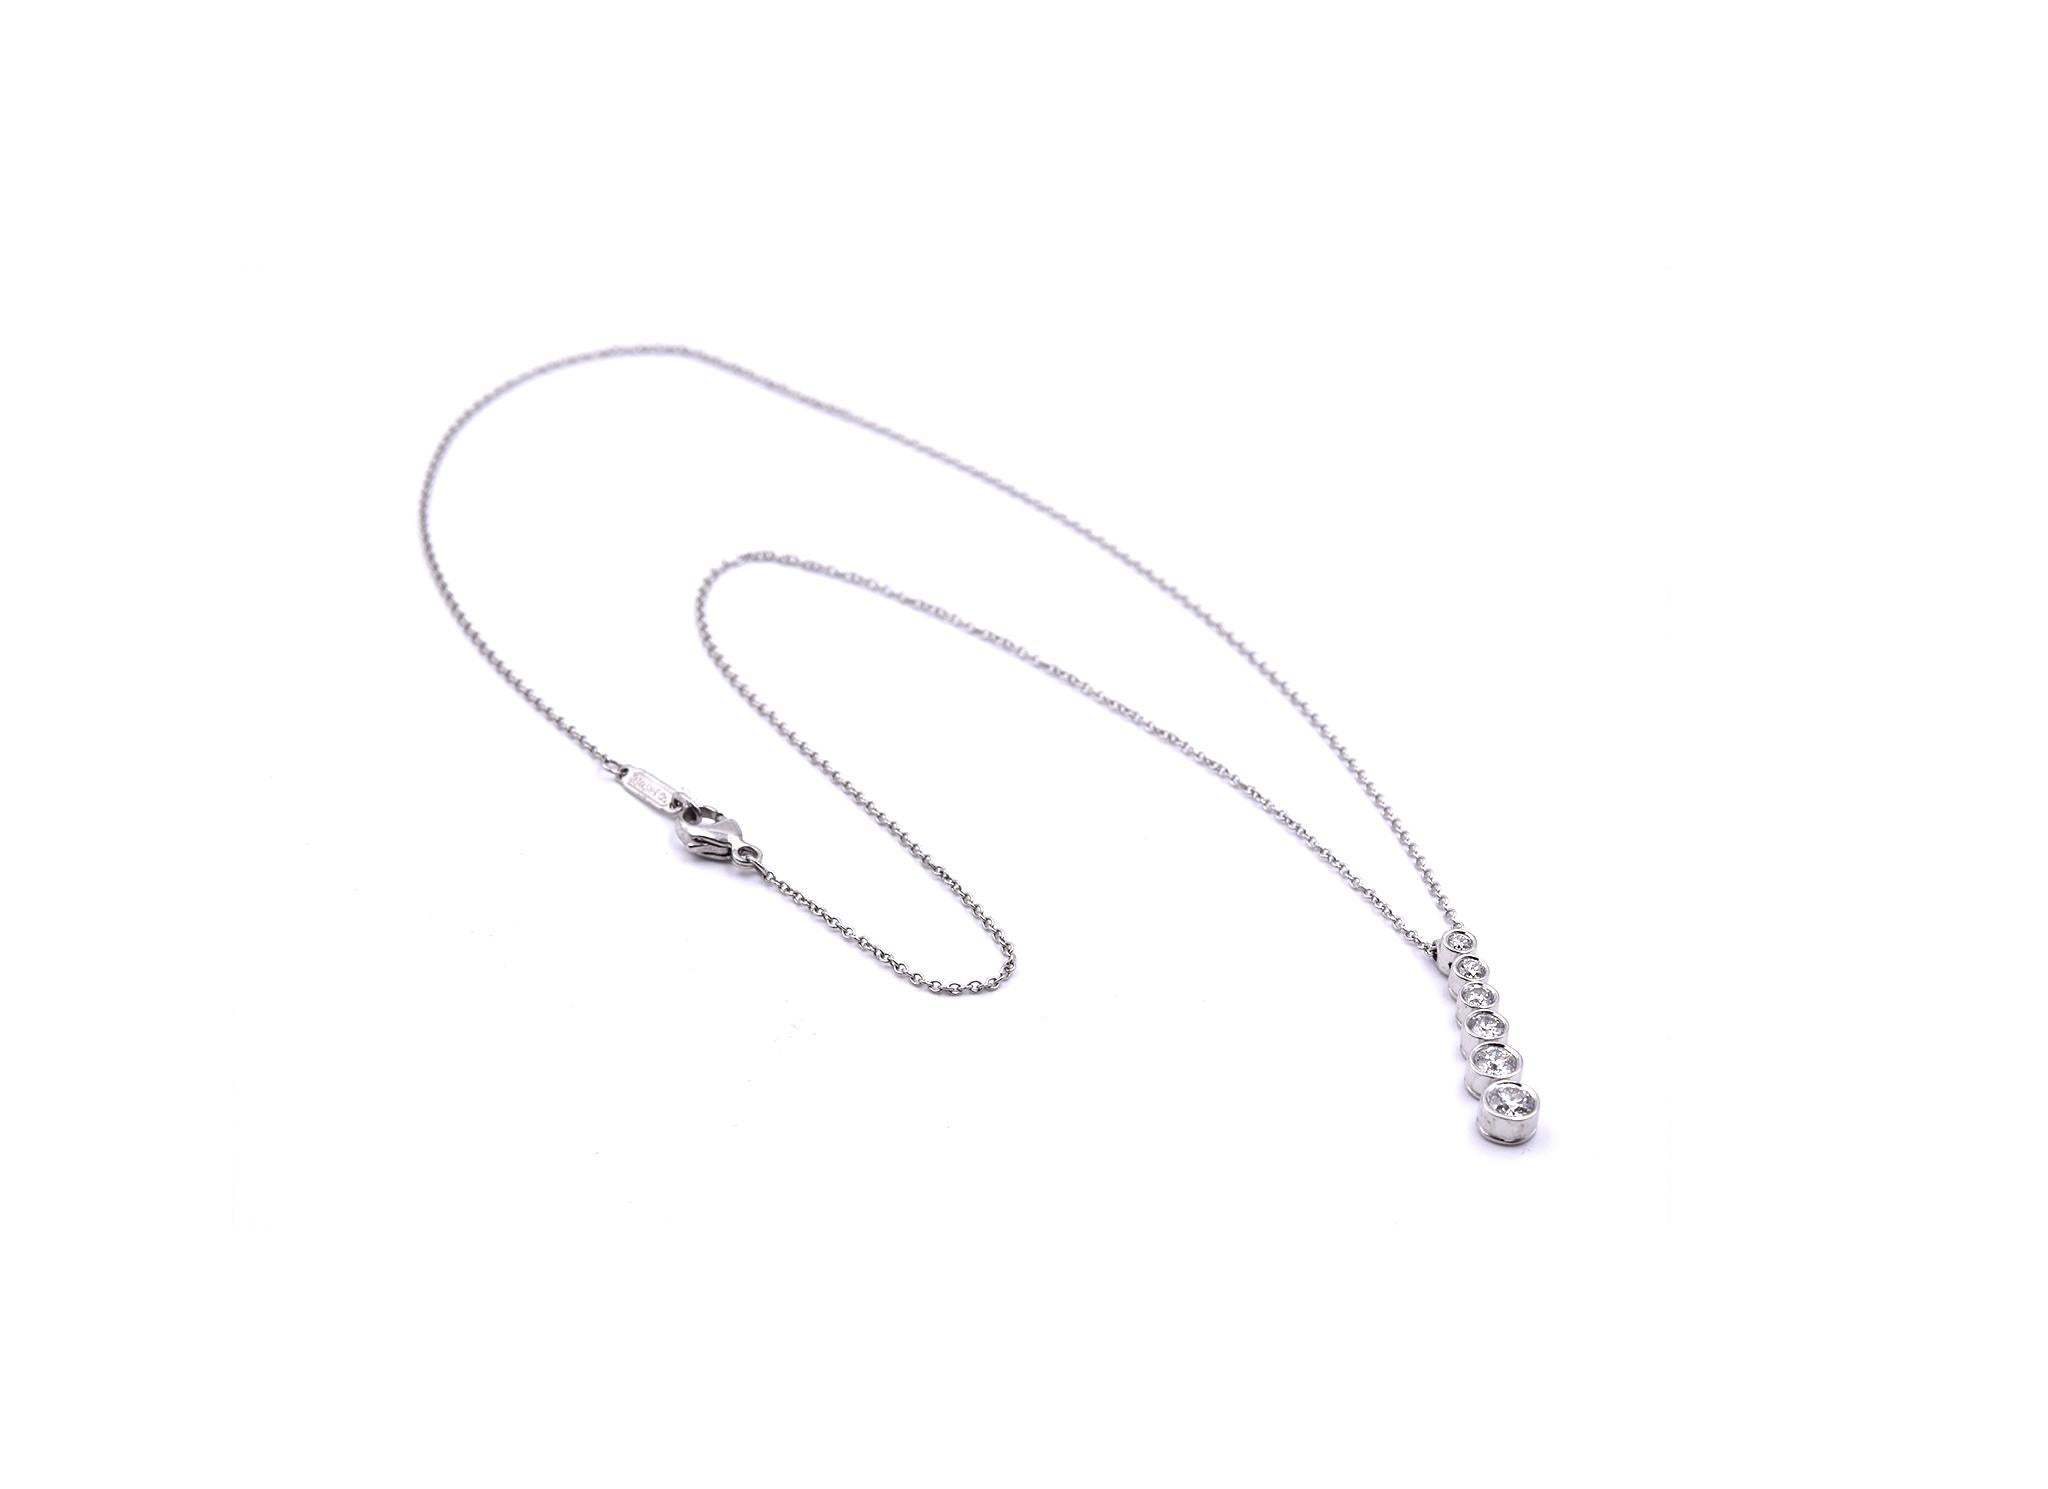 Designer: Tiffany & Co. 
Material: platinum
Diamonds: 6 round brilliant cut= .45cttw
Color: G
Clarity: VS
Dimensions: necklace is 16” long and pendant drop is ¾ of an inch long
Weight: 4.68 grams
